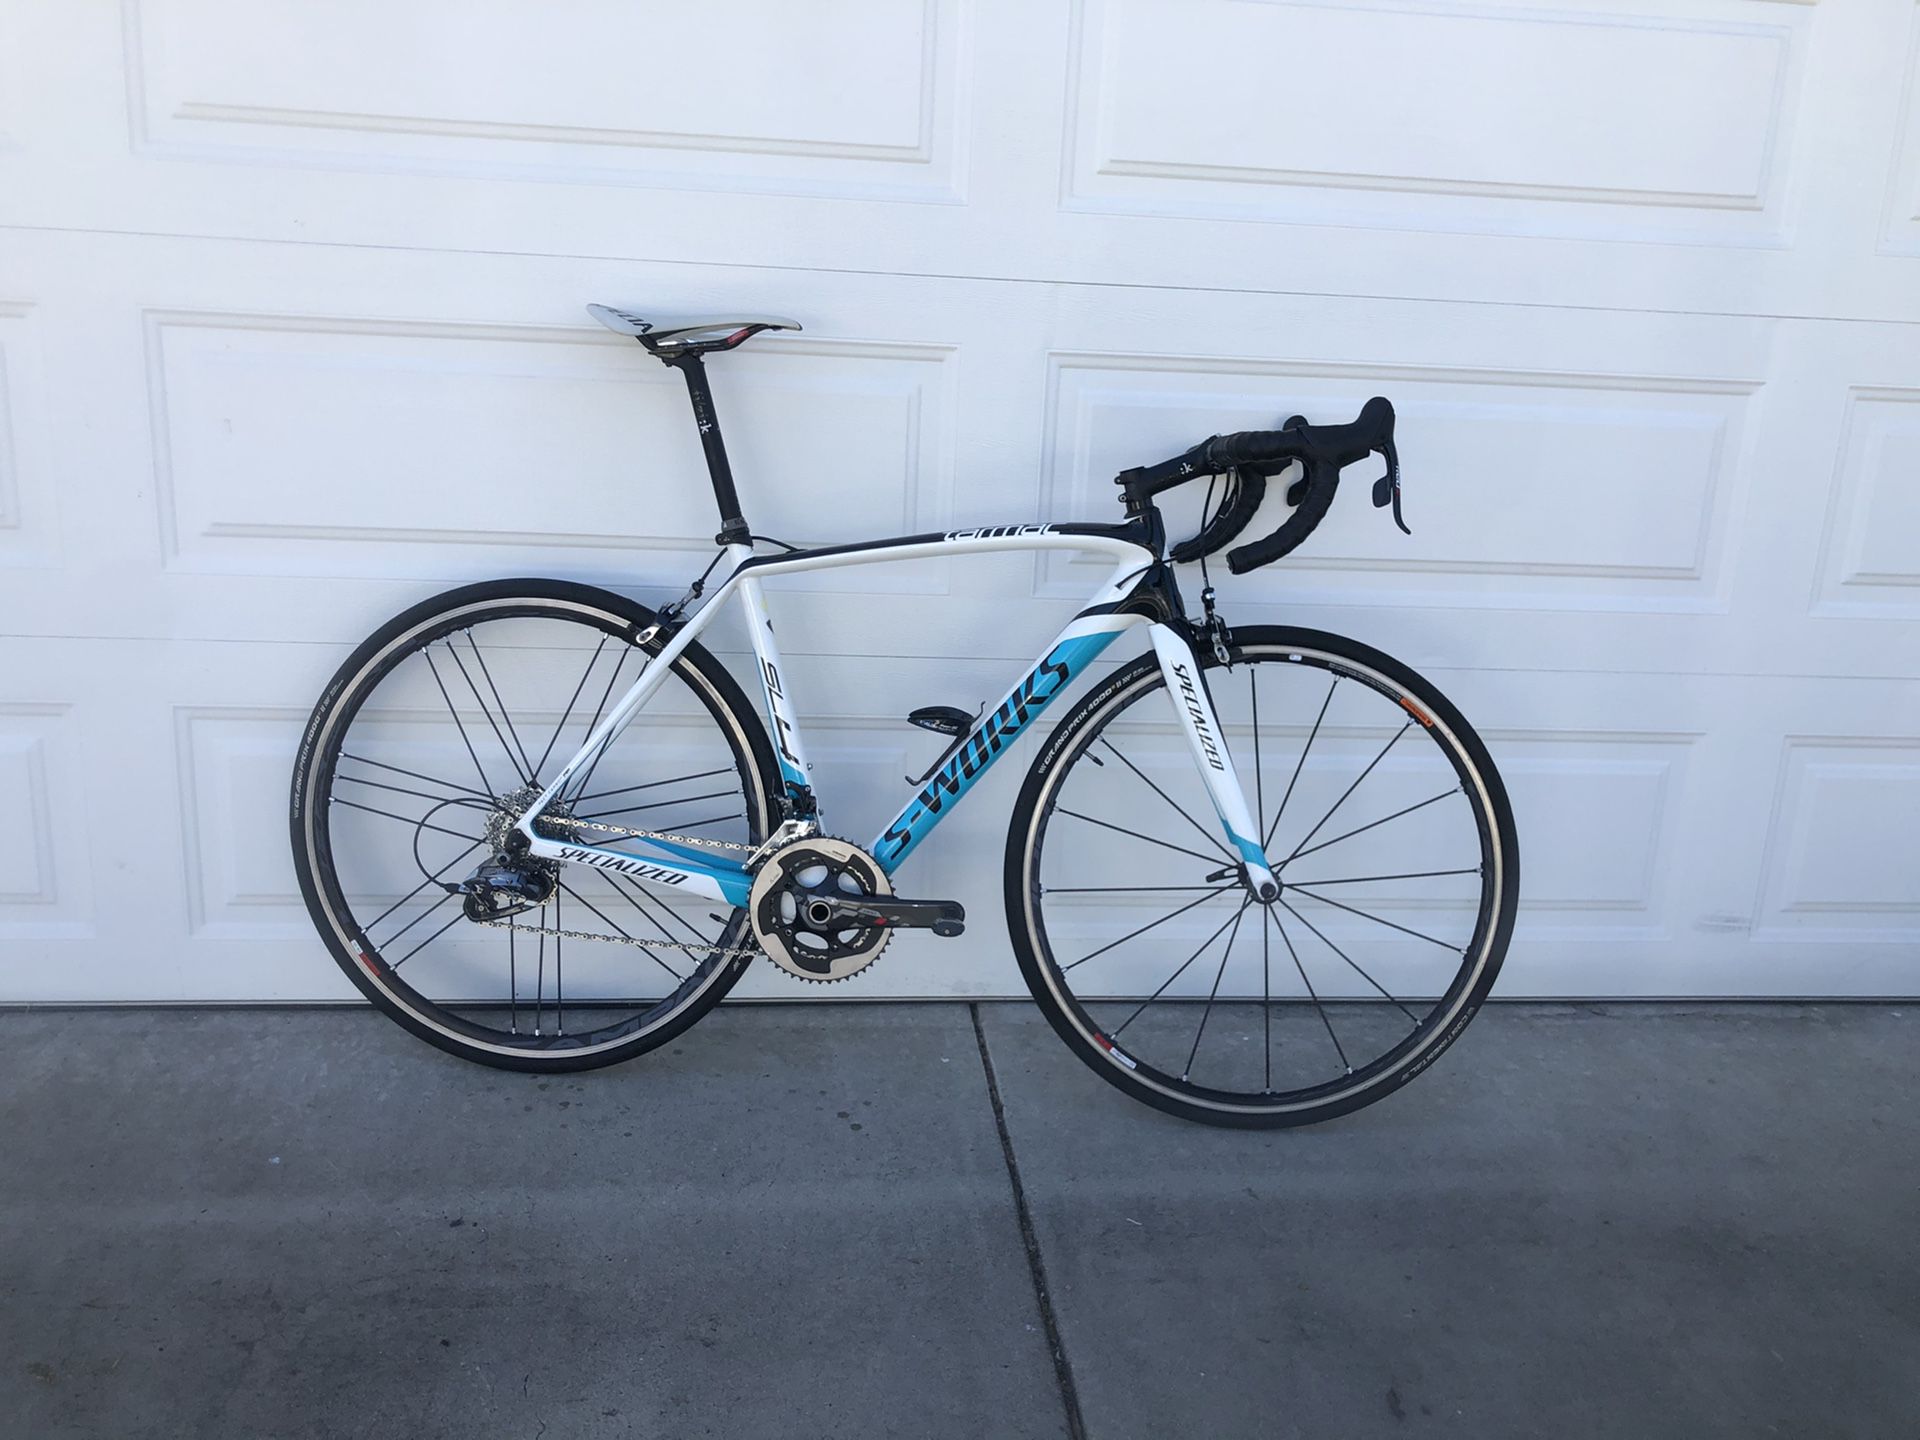 S-works tarmac SL4 54cm team Astana back up bike. Sram shimano specialized and campagnolo parts